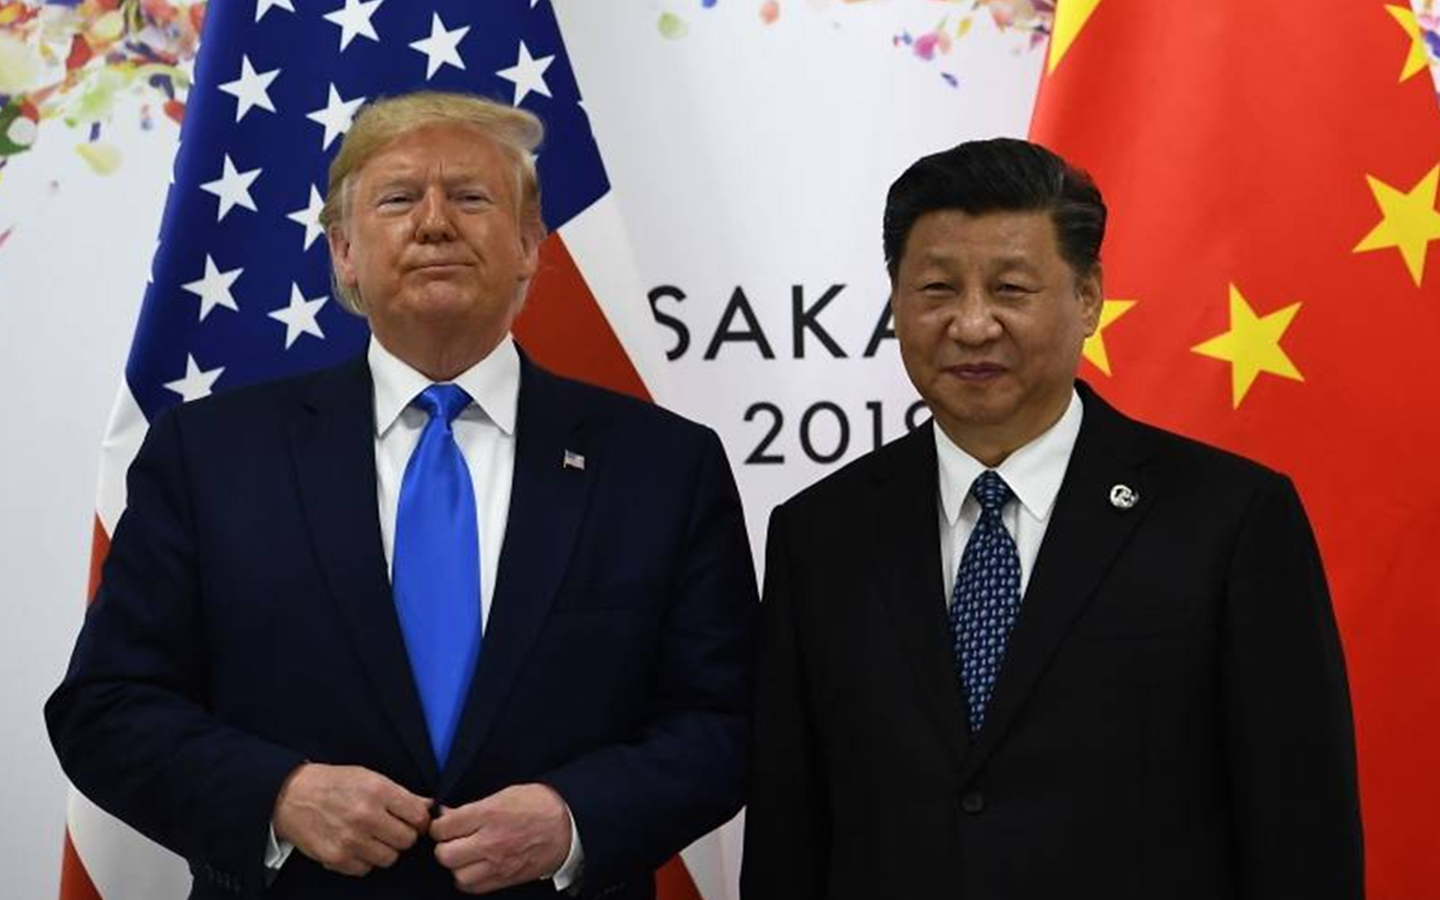 American President and his Chinese counterpart Xi Jinping met on the sidelines of the G20 summit to discuss the Trade tariffs levied between the two countries.